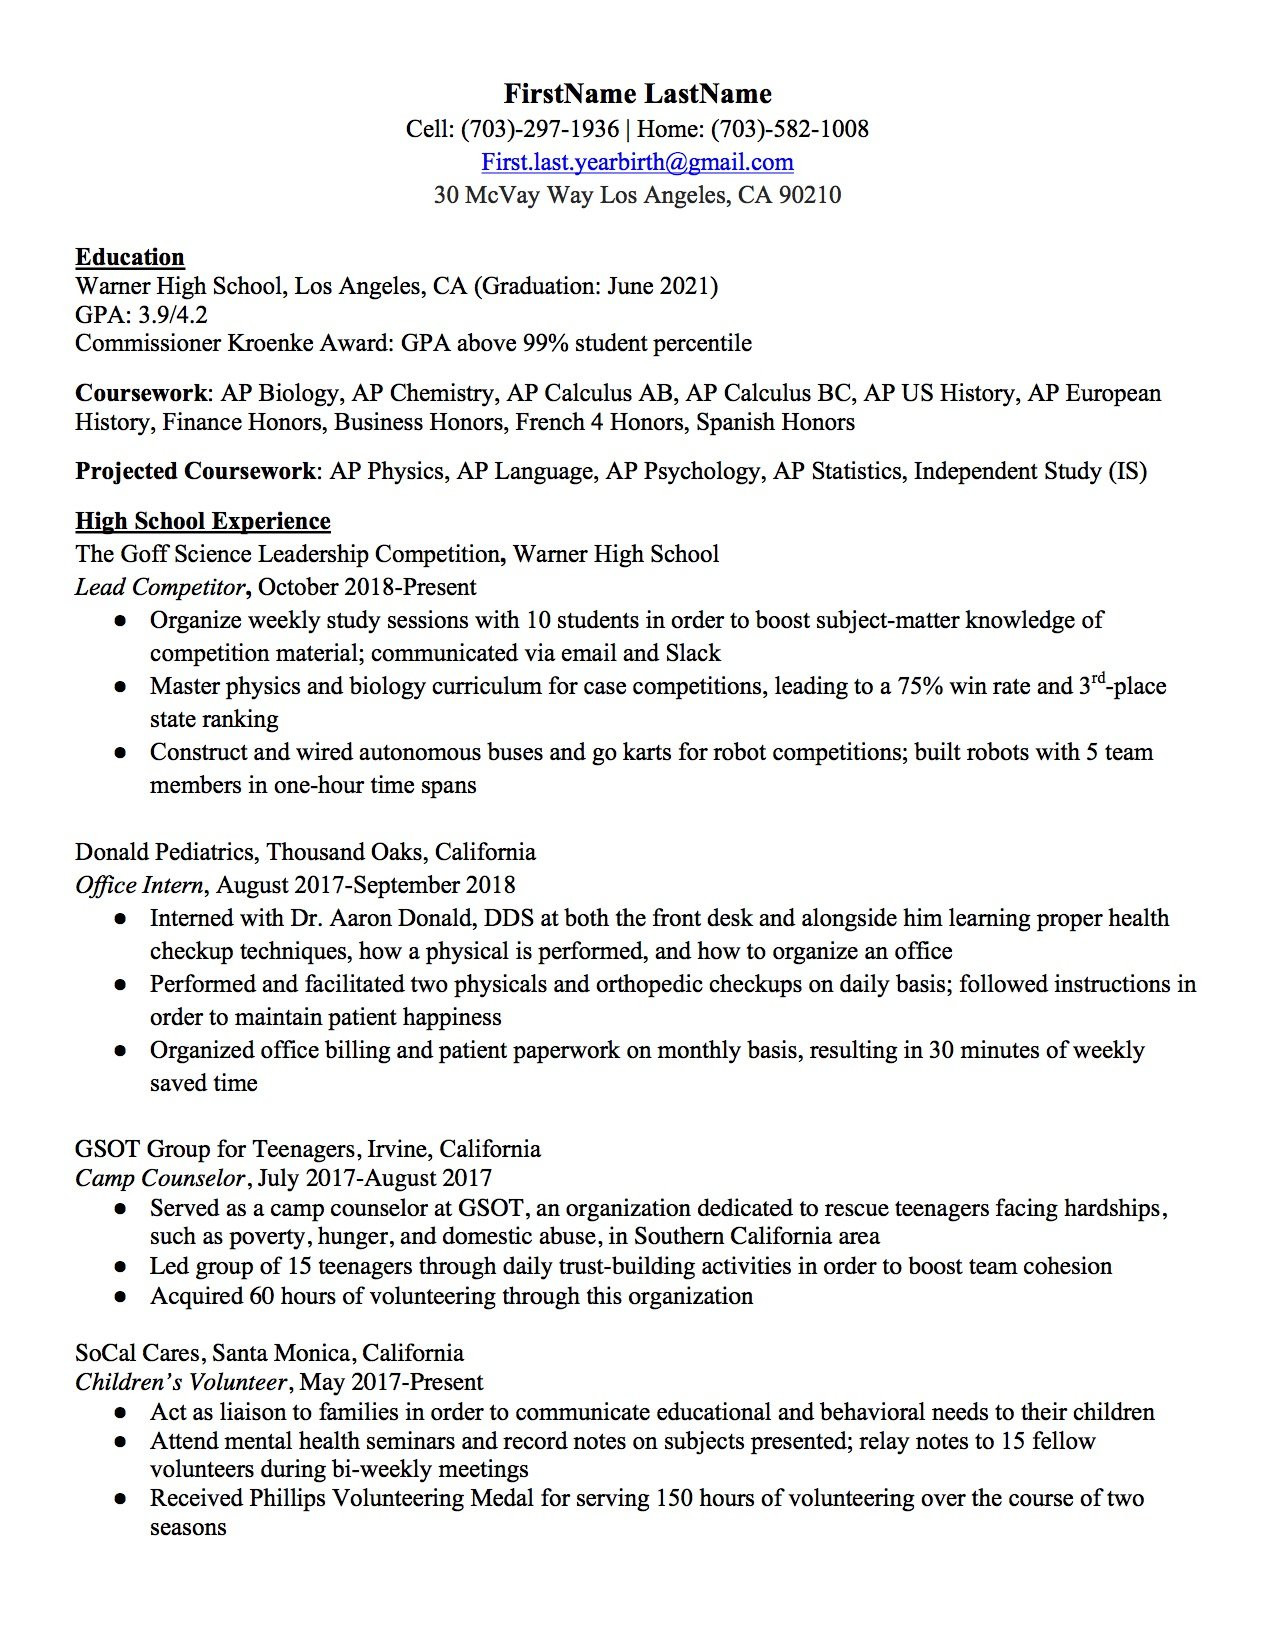 Activities Resume Template for College Application High_school_resume_template â Transizion